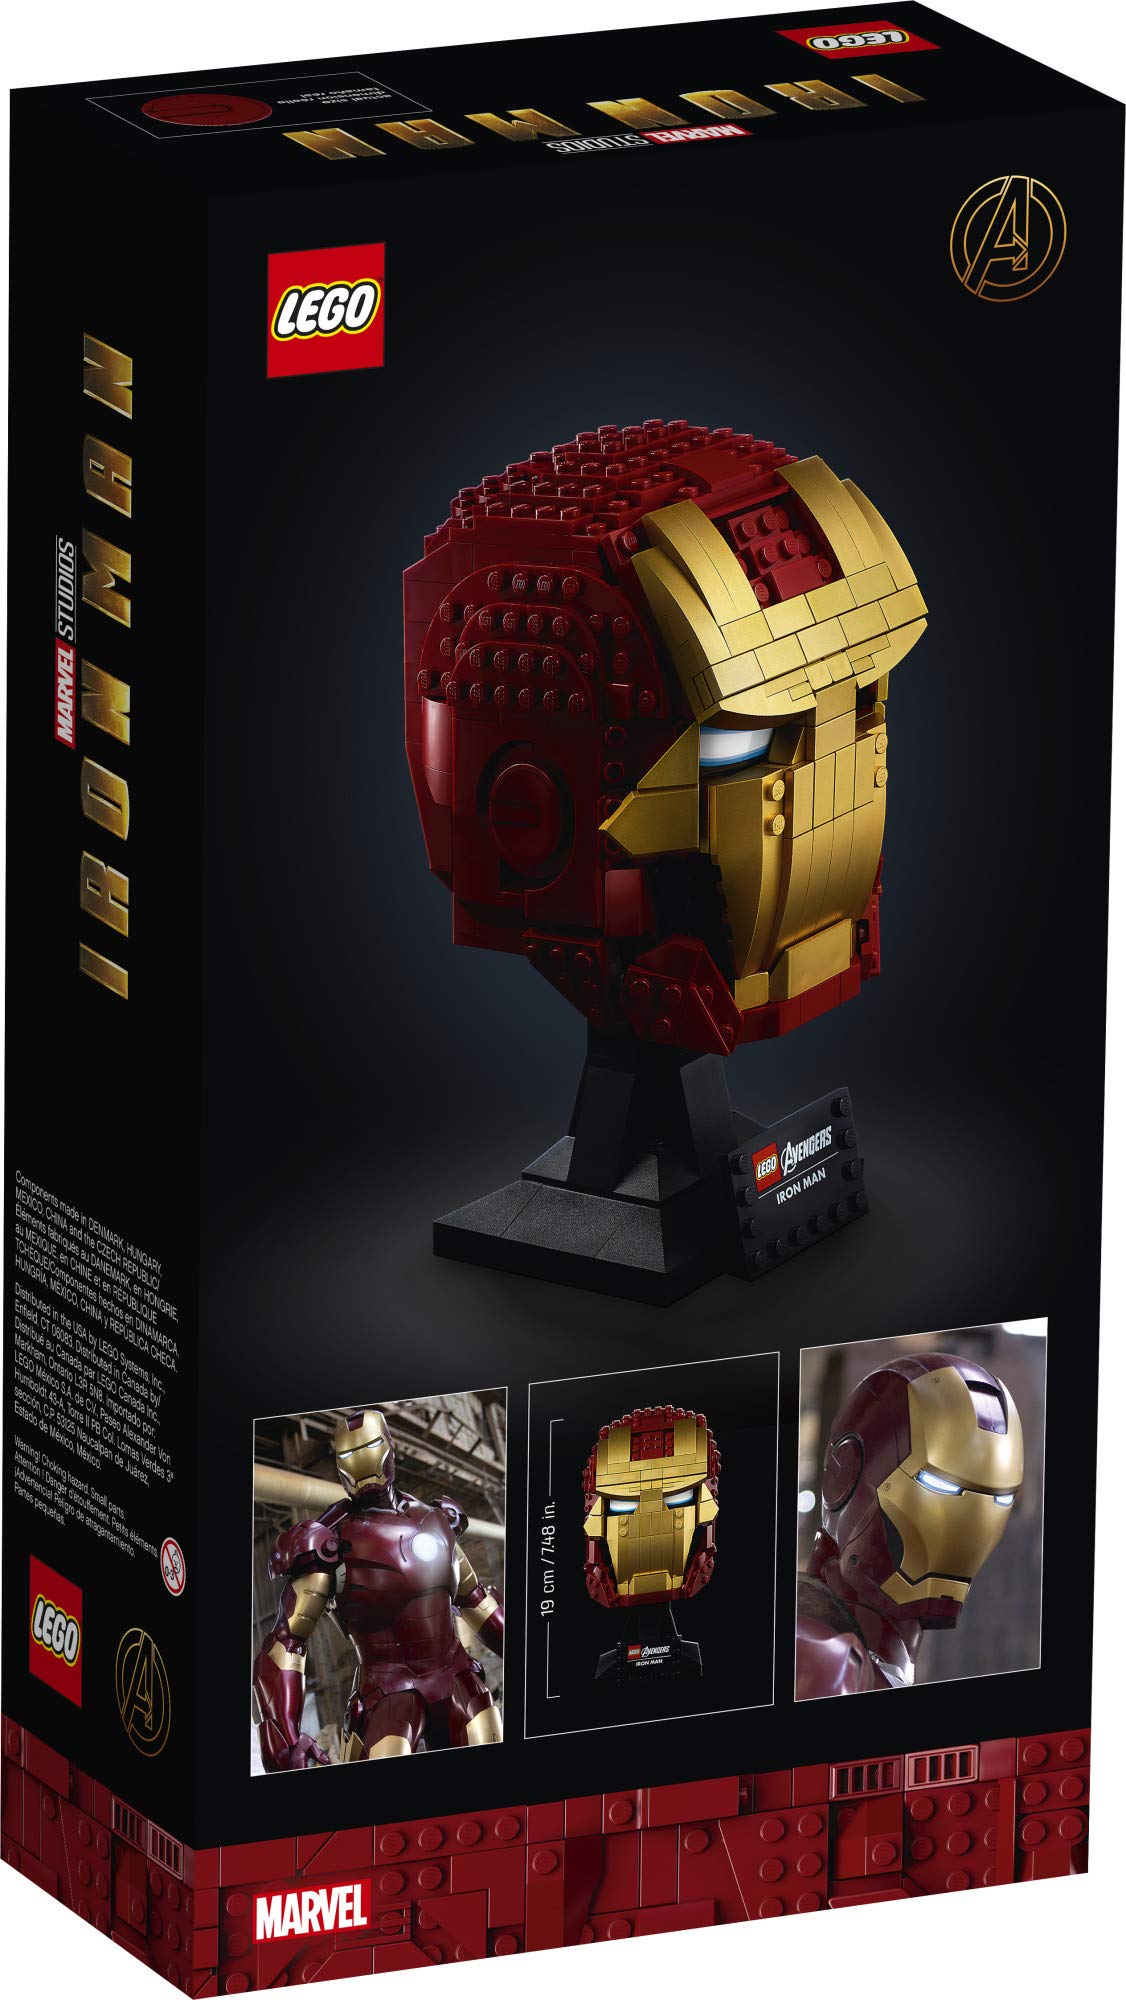 LEGO Marvel Avengers Iron Man Helmet 76165; Brick Iron Man-Mask for-Adults to Build and Display, Creative Challenge for Marvel Fans (480 Pieces)